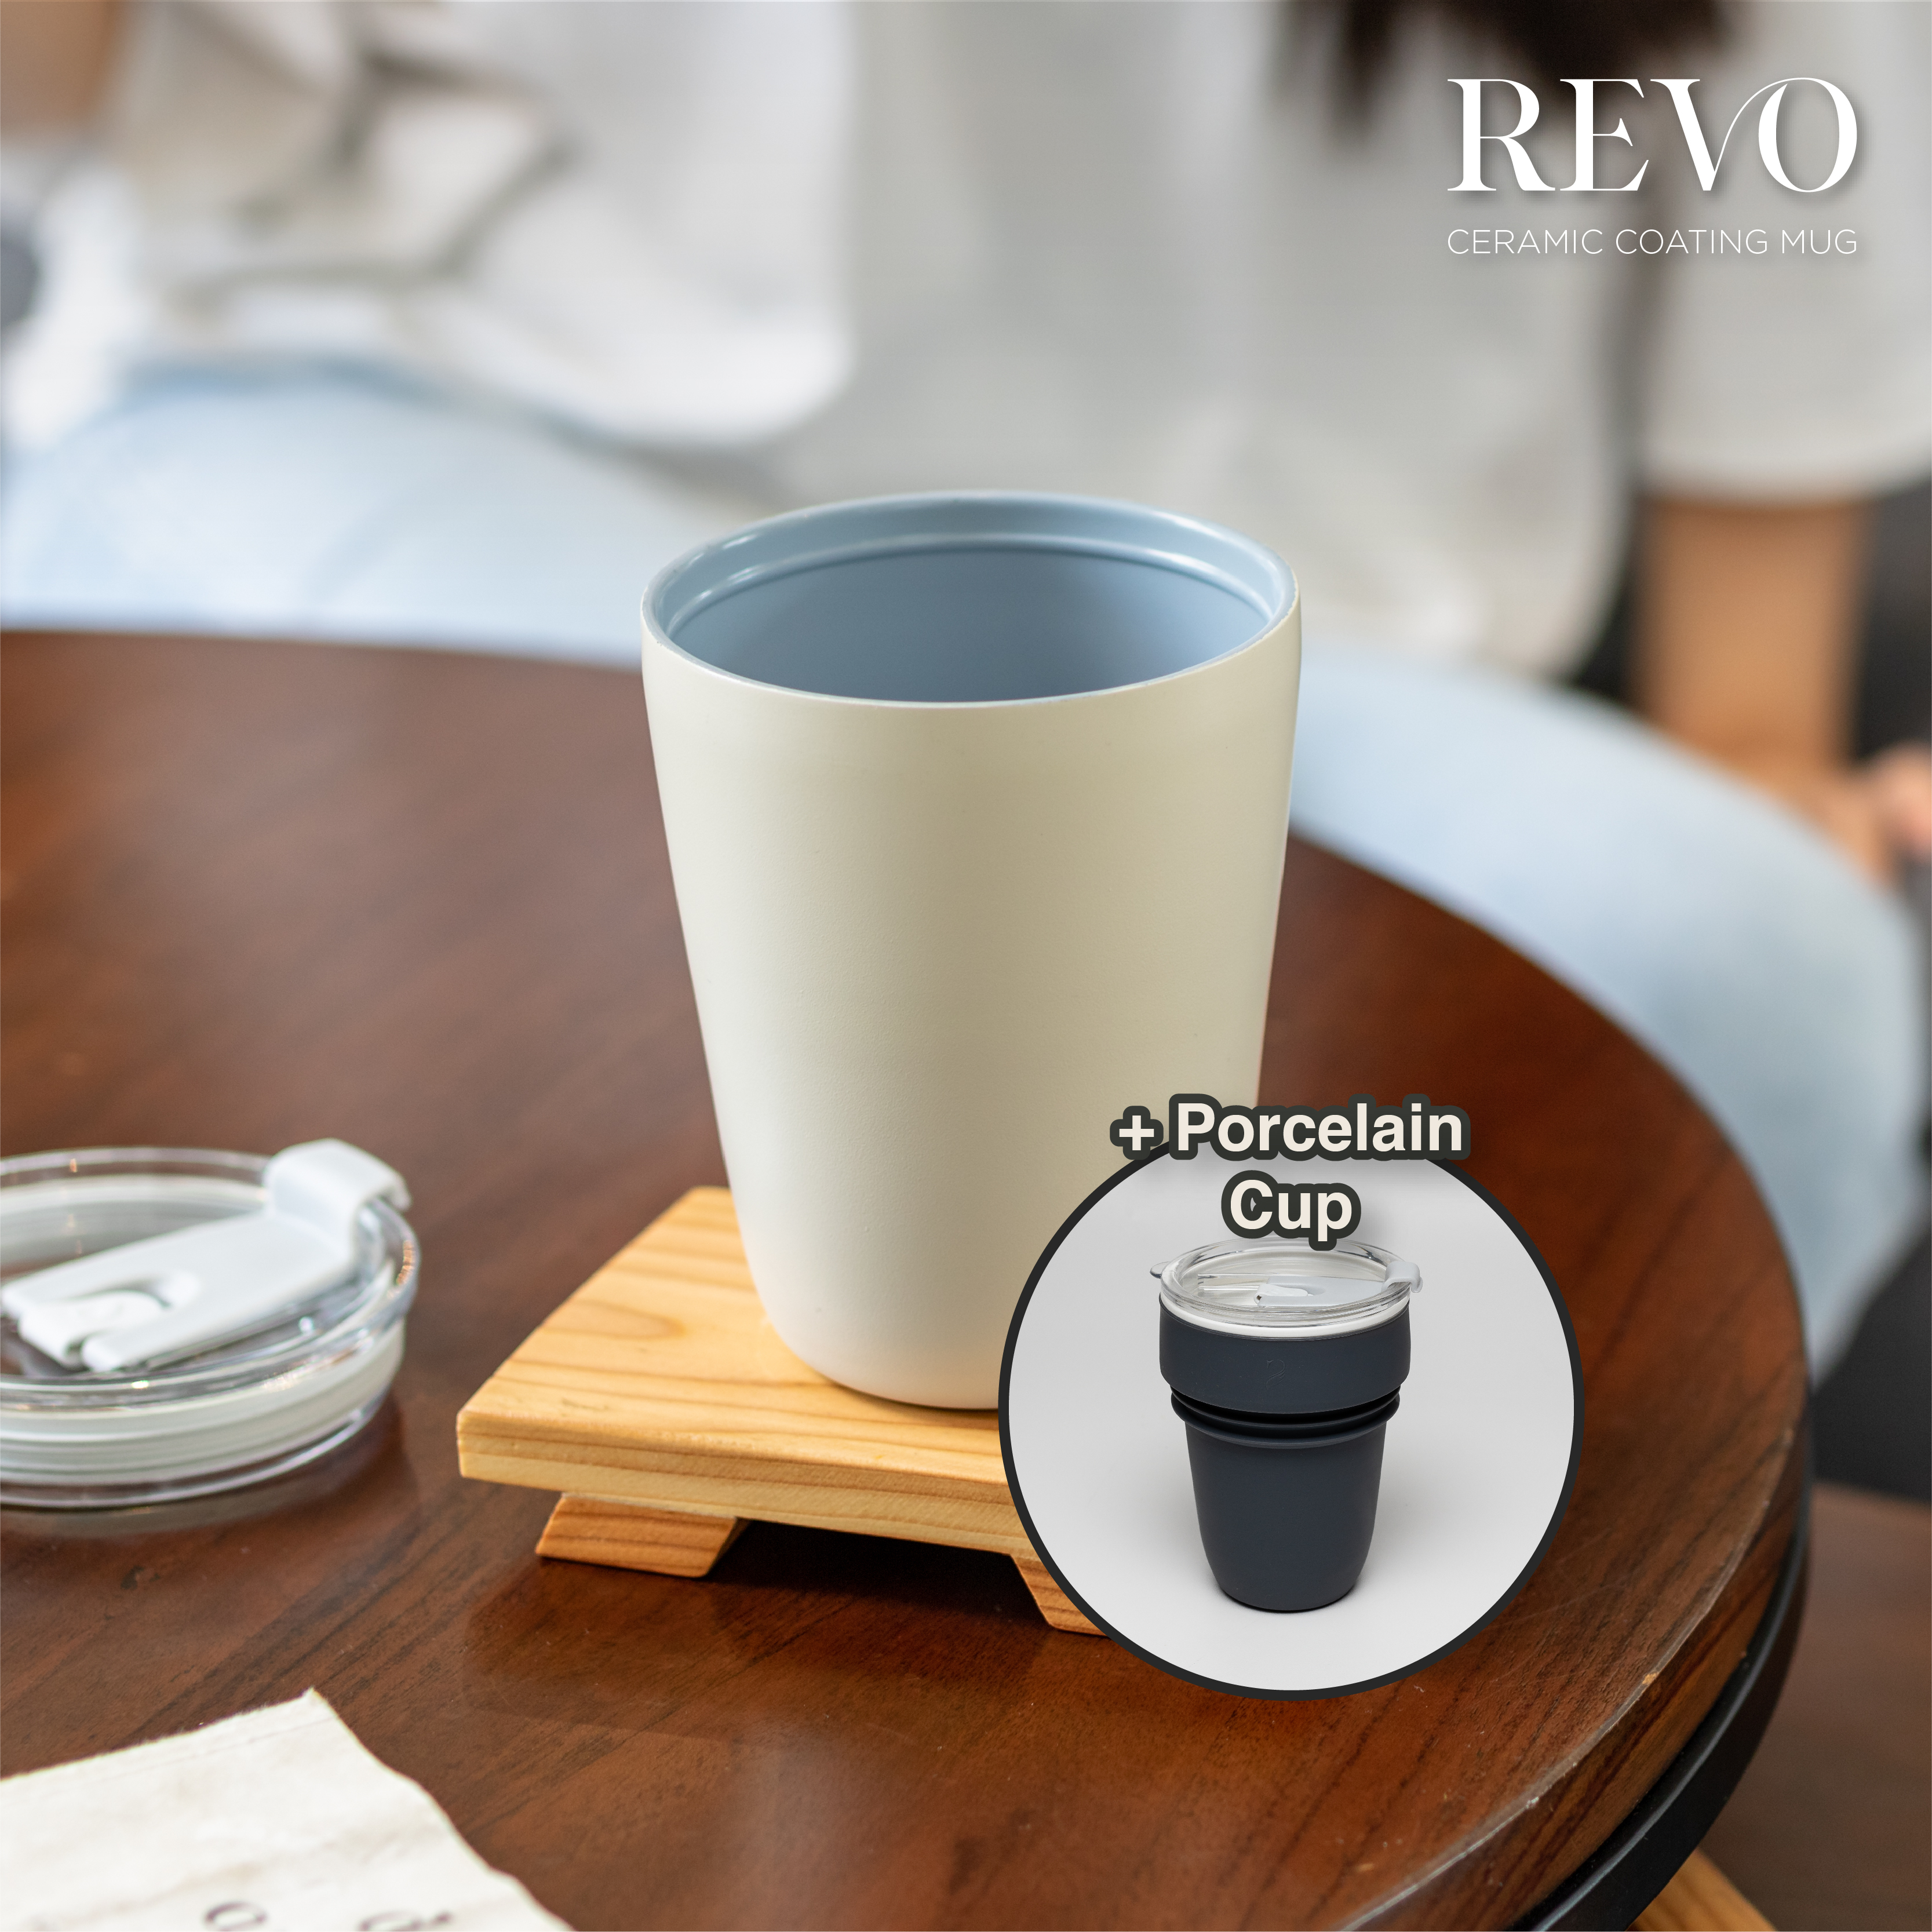 Revo Cup 480ml with Add-on Porcelain Cup